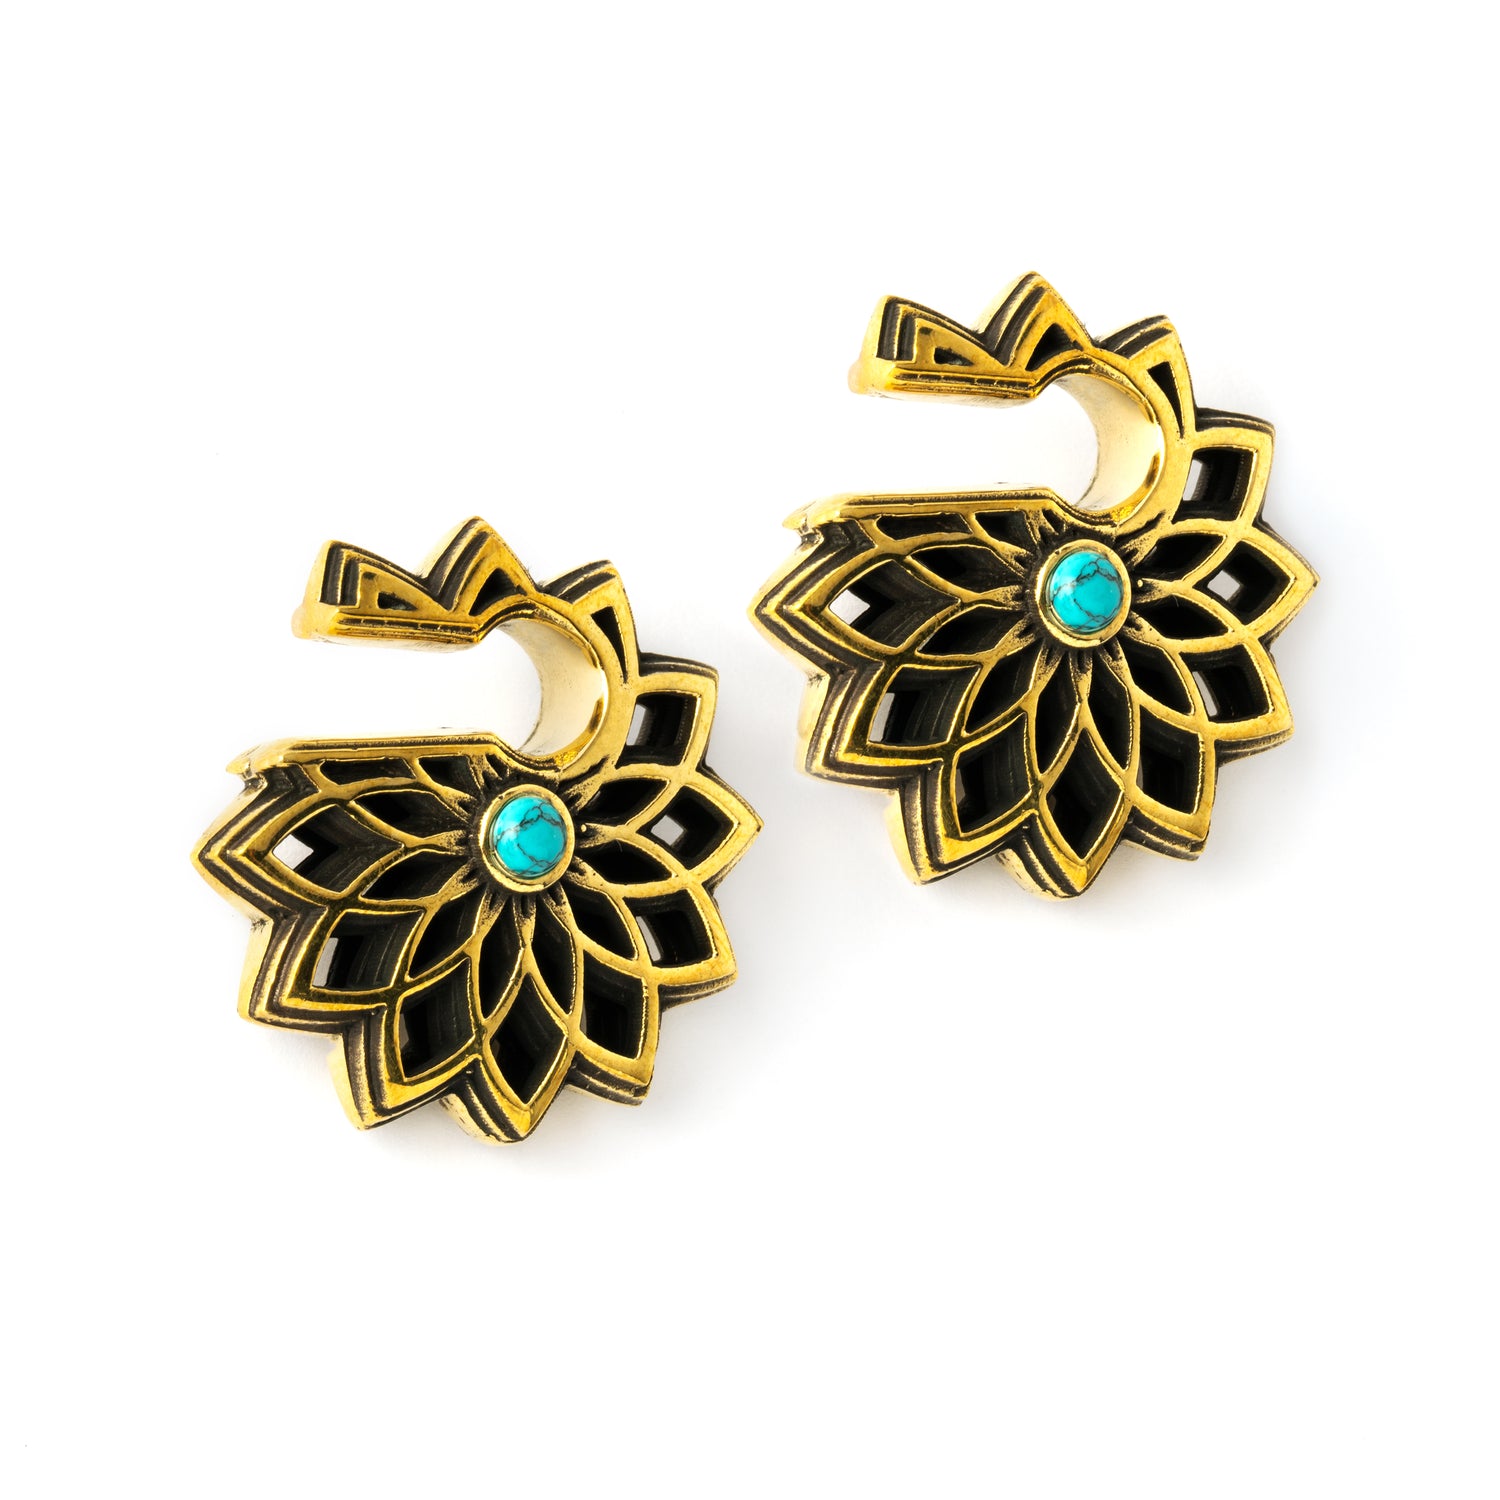 pair of antique gold colour geometric flower ear weights hangers with turquoise right side view